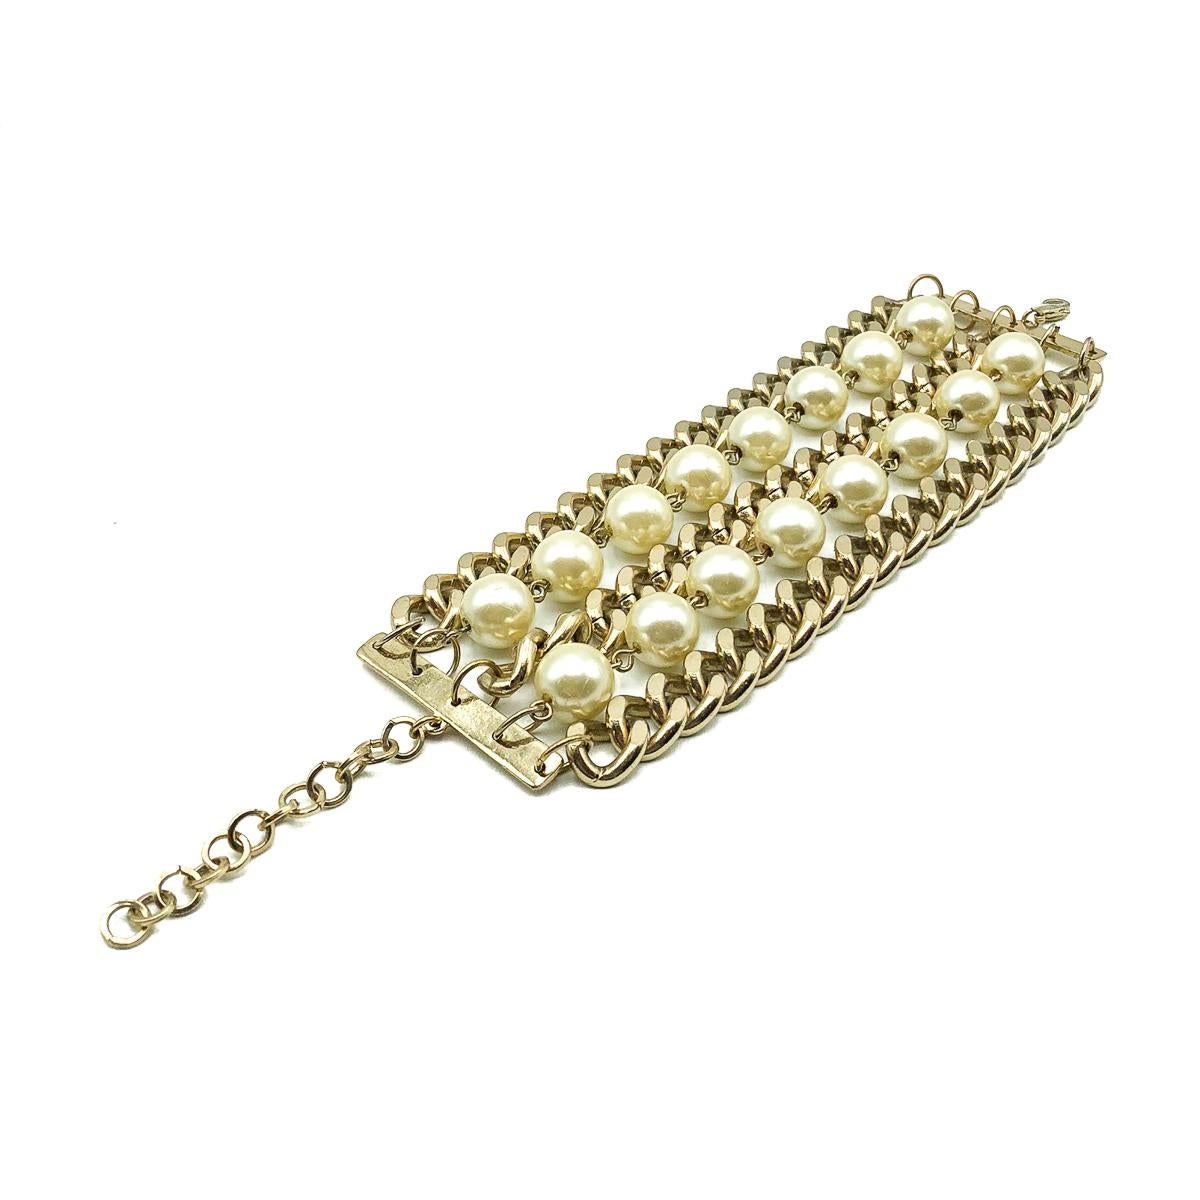 A Vintage Pearl Chainmail Cuff. Crafted in a light coloured gold tone metal with wonderful large glass faux pearl beads. Very good vintage condition, Adjustable 18-22cms. The striking combination of the flattened curb chains with the pearls creates